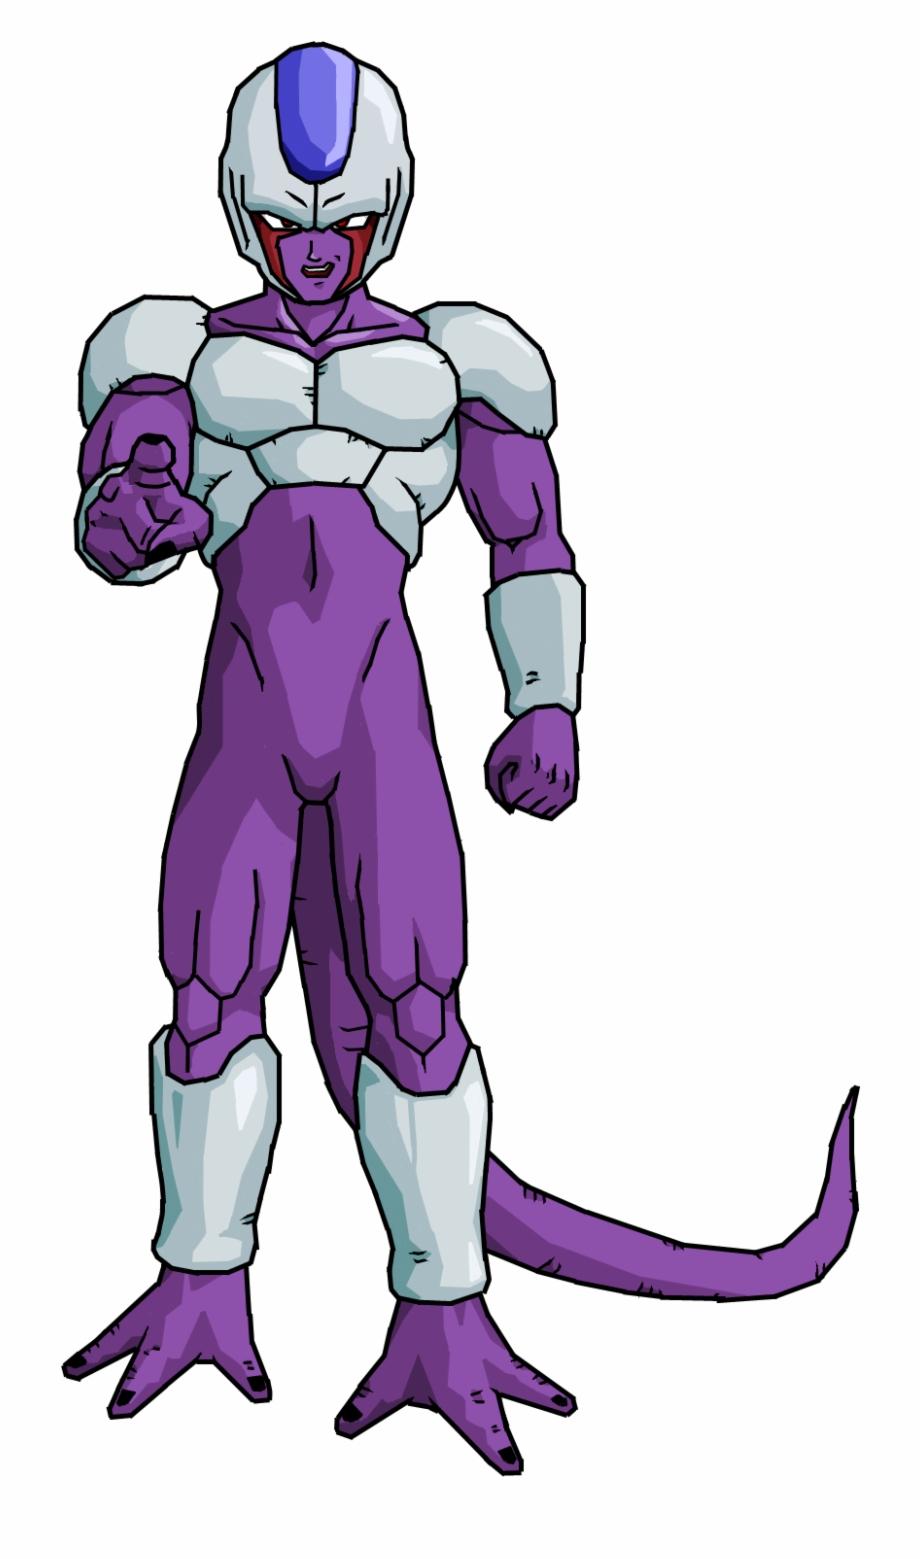 Frieza Vs Cooler, who Really Is The Stronger Brother